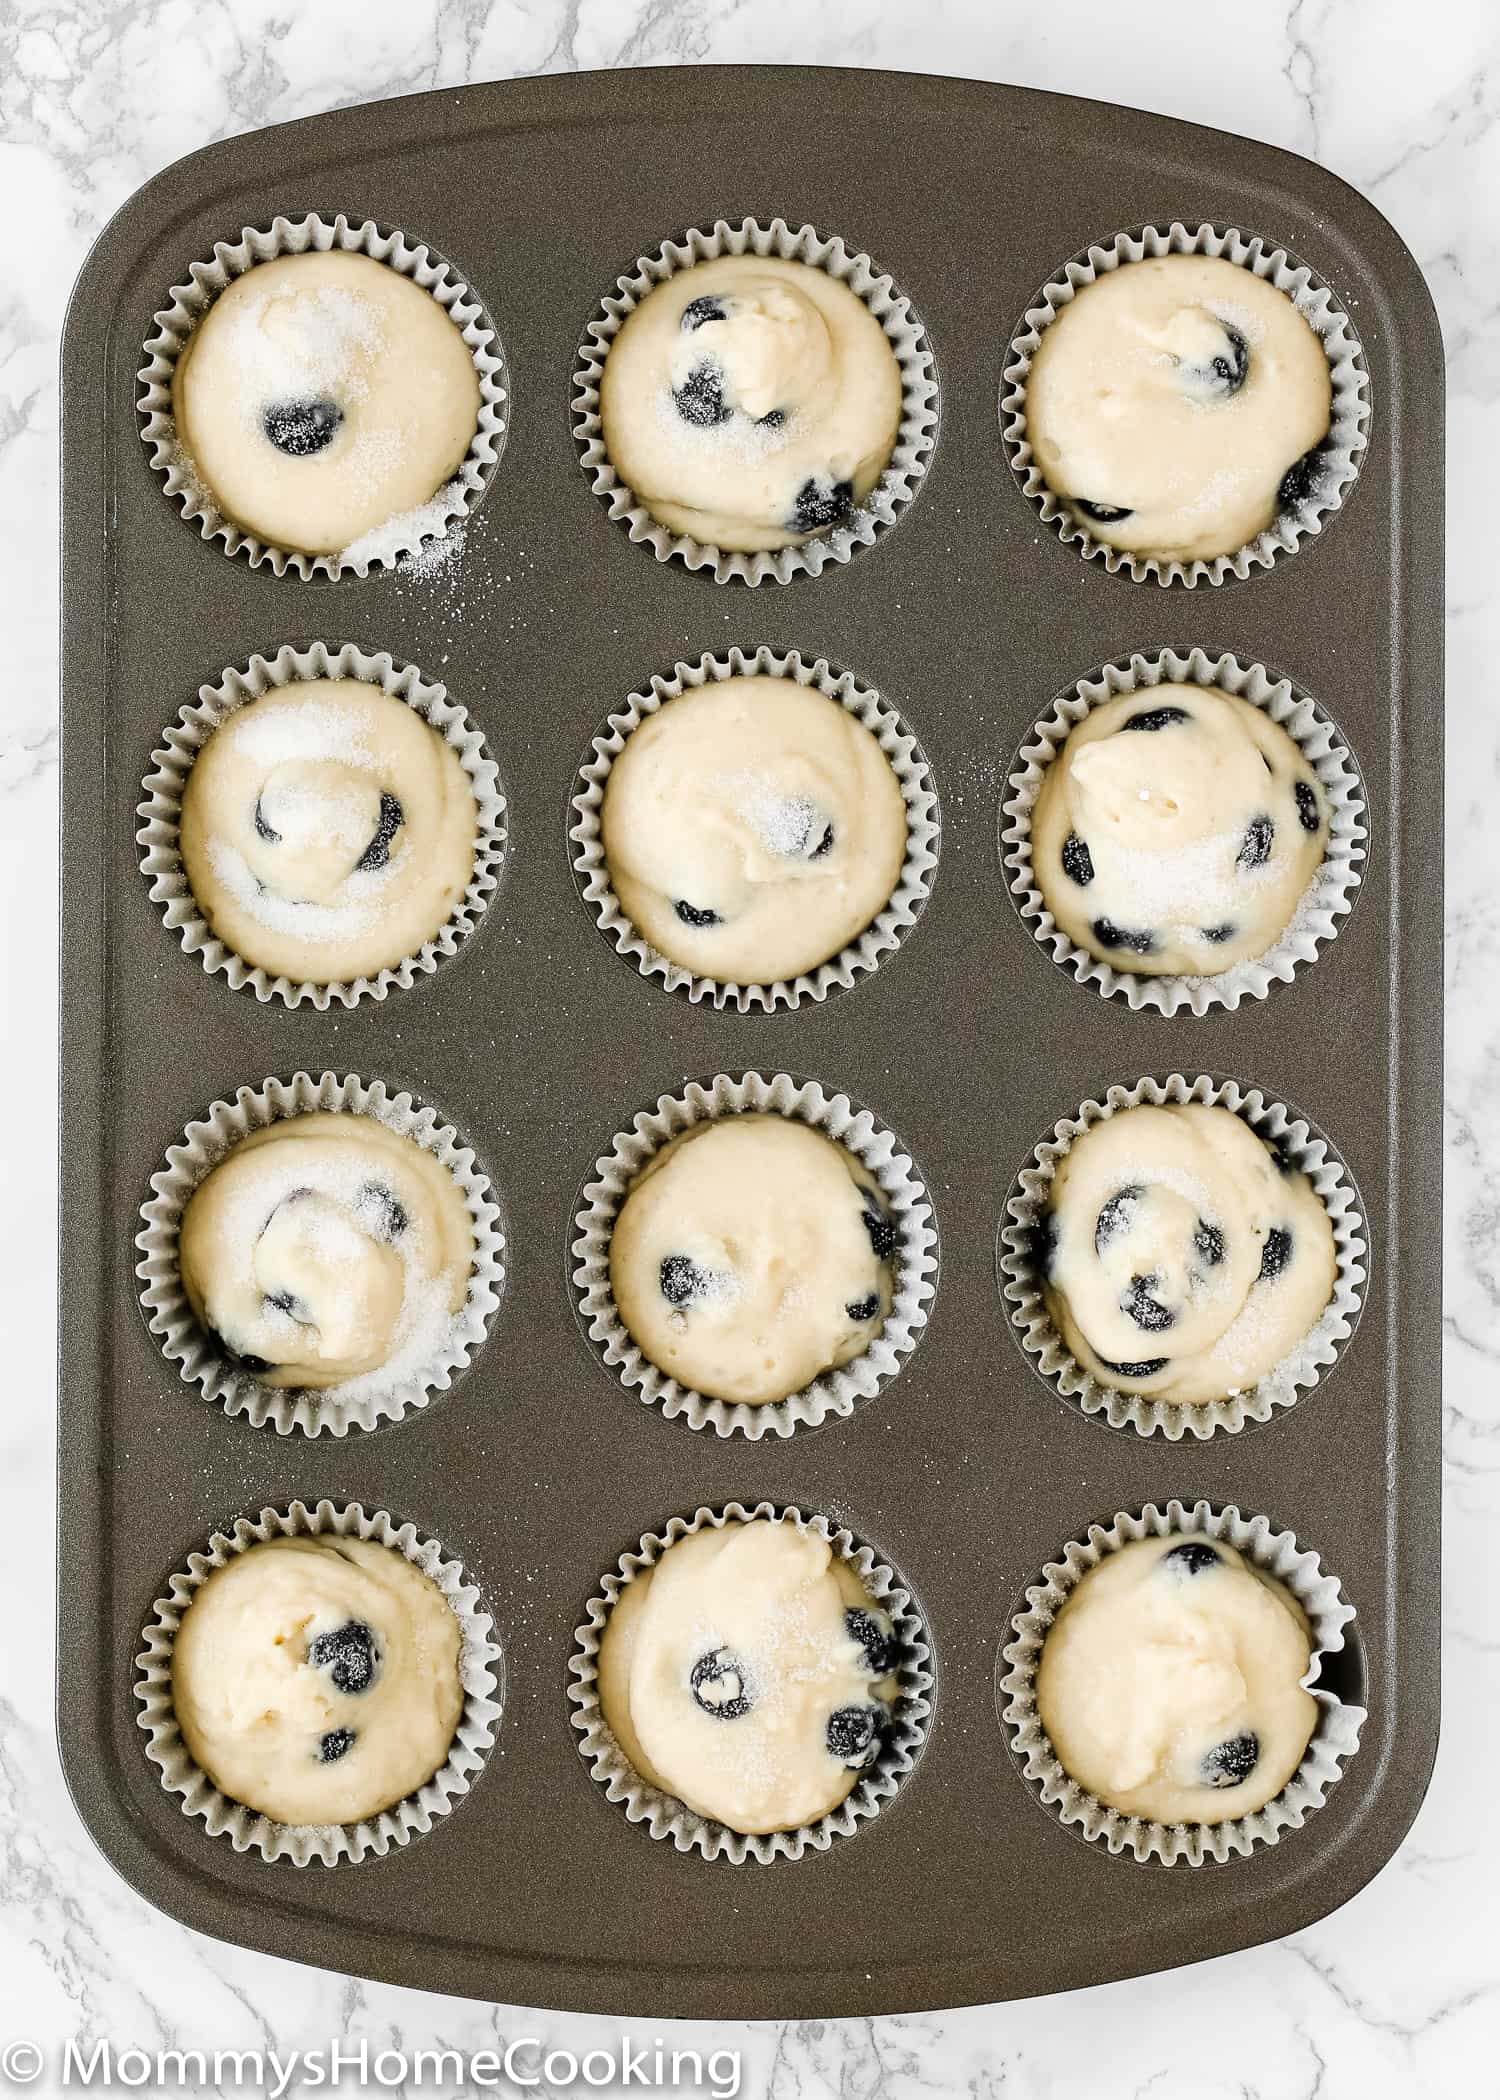 unbaked Eggless Blueberry Muffins in a muffin tin.